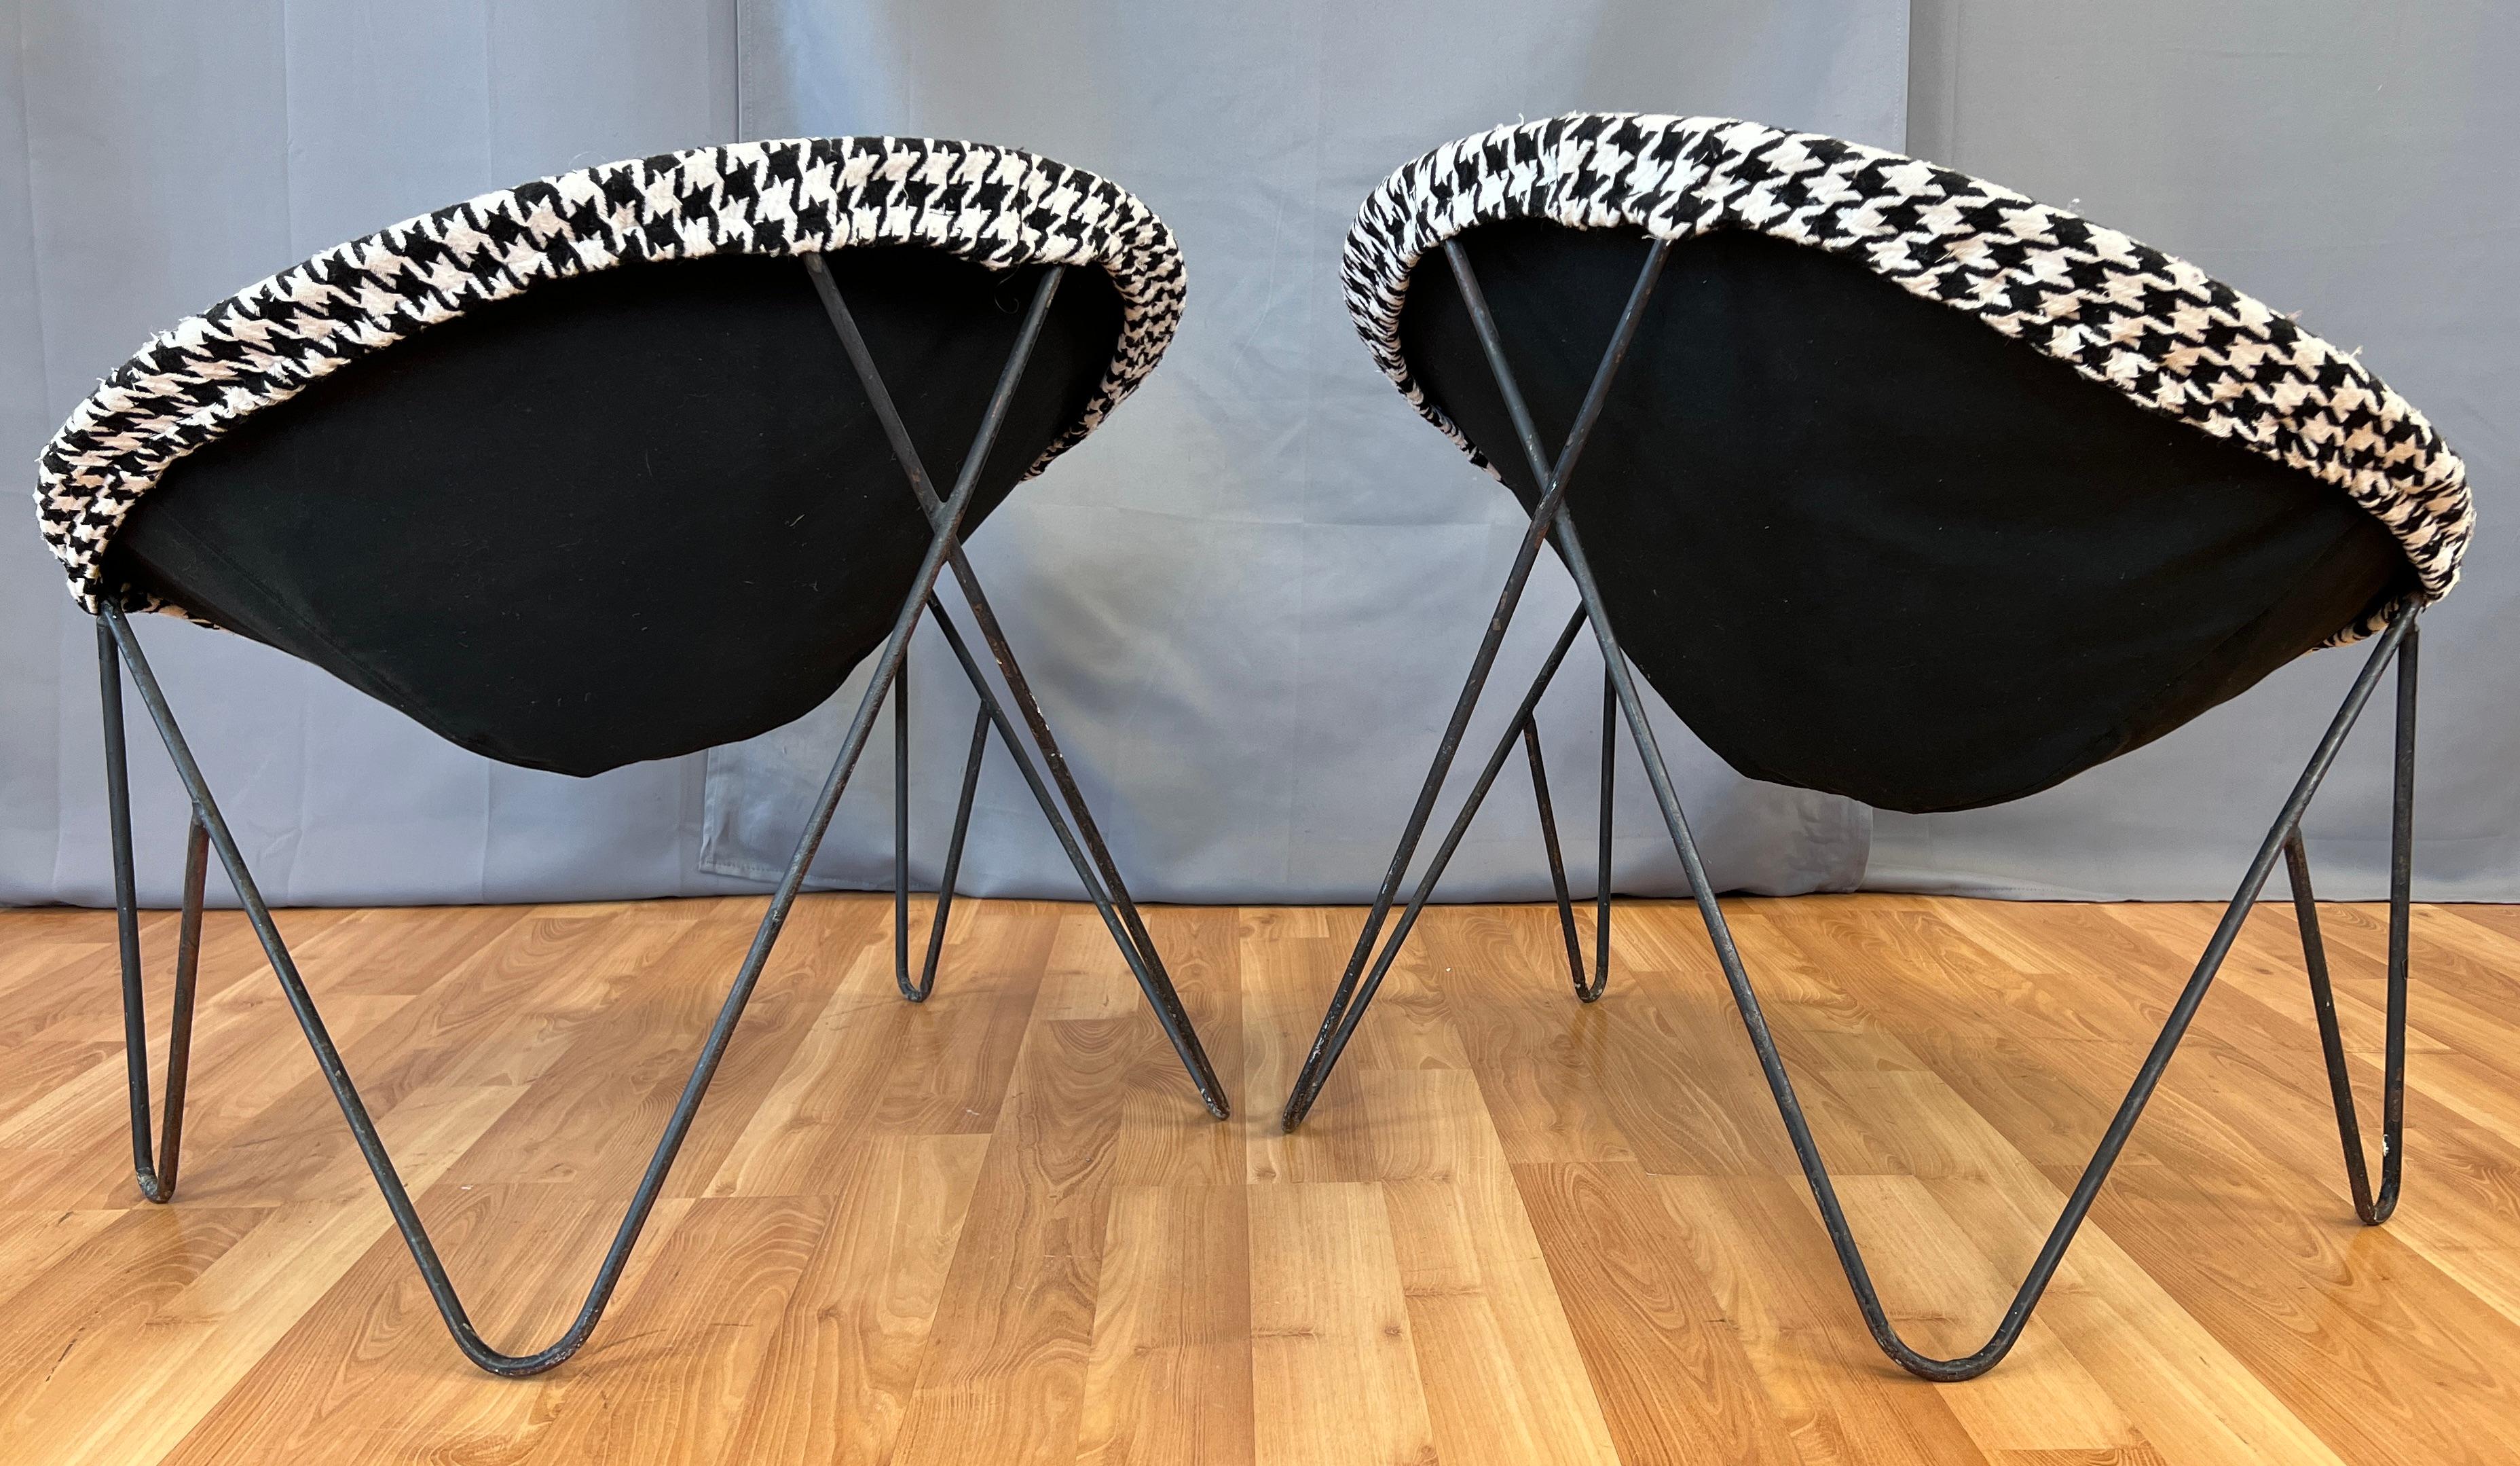 Pair of Mid-century 1950s Wrought Iron Hoop Chairs Black/White Upholstery  In Good Condition For Sale In San Francisco, CA